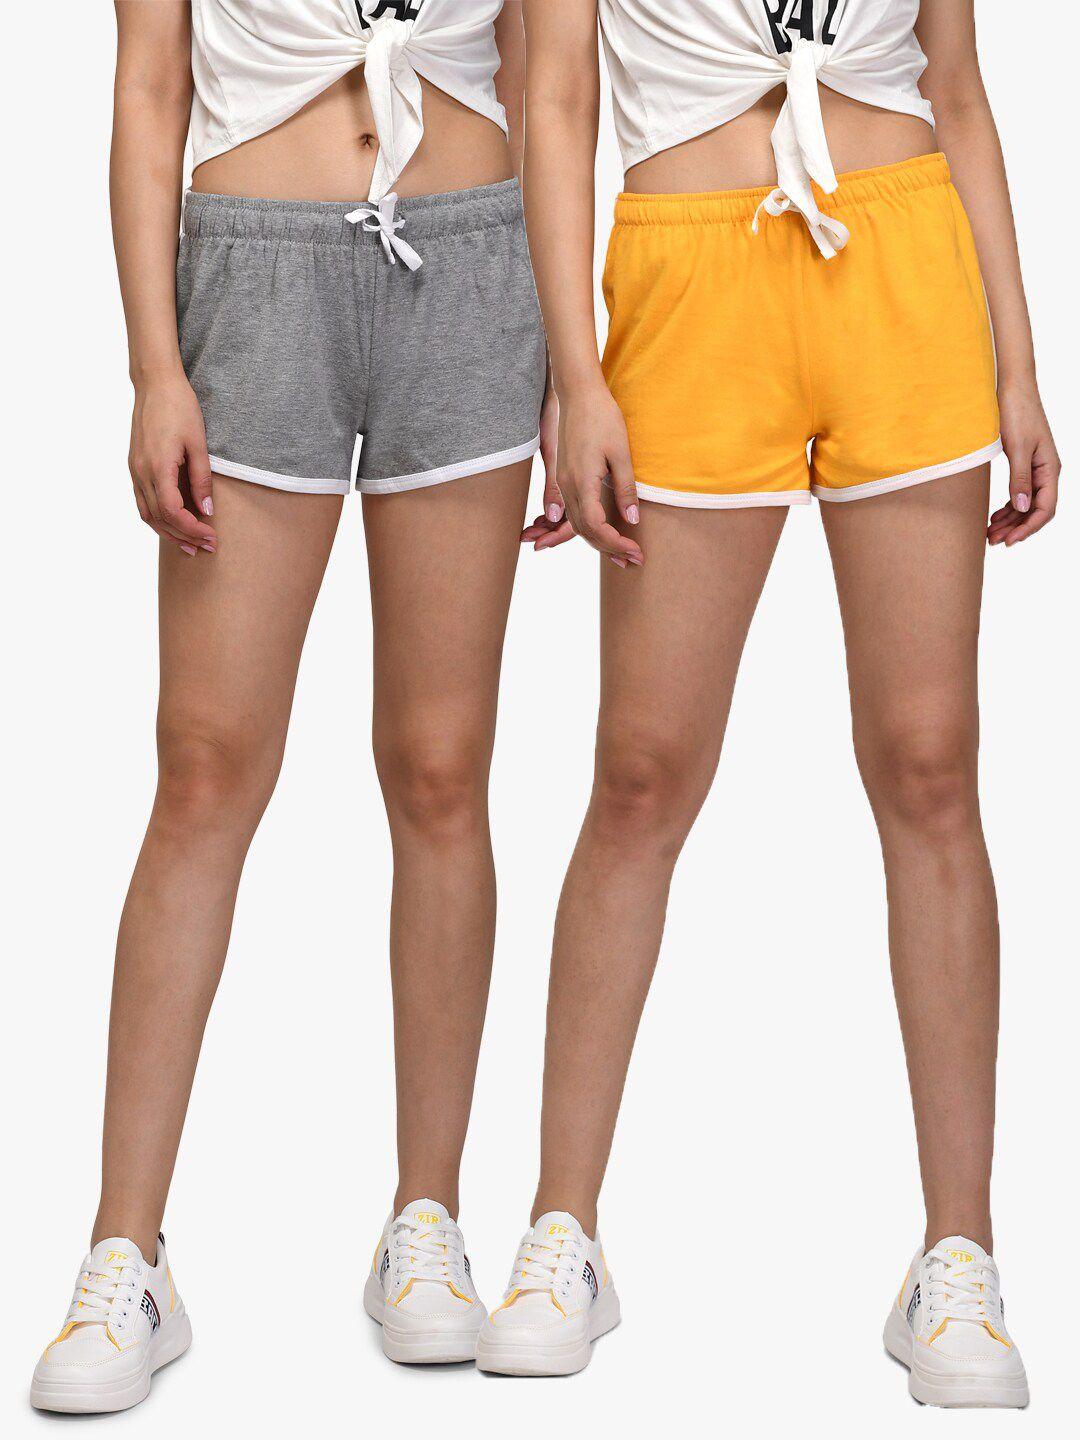 kotty-women-pack-of-2-solid-lounge-shorts